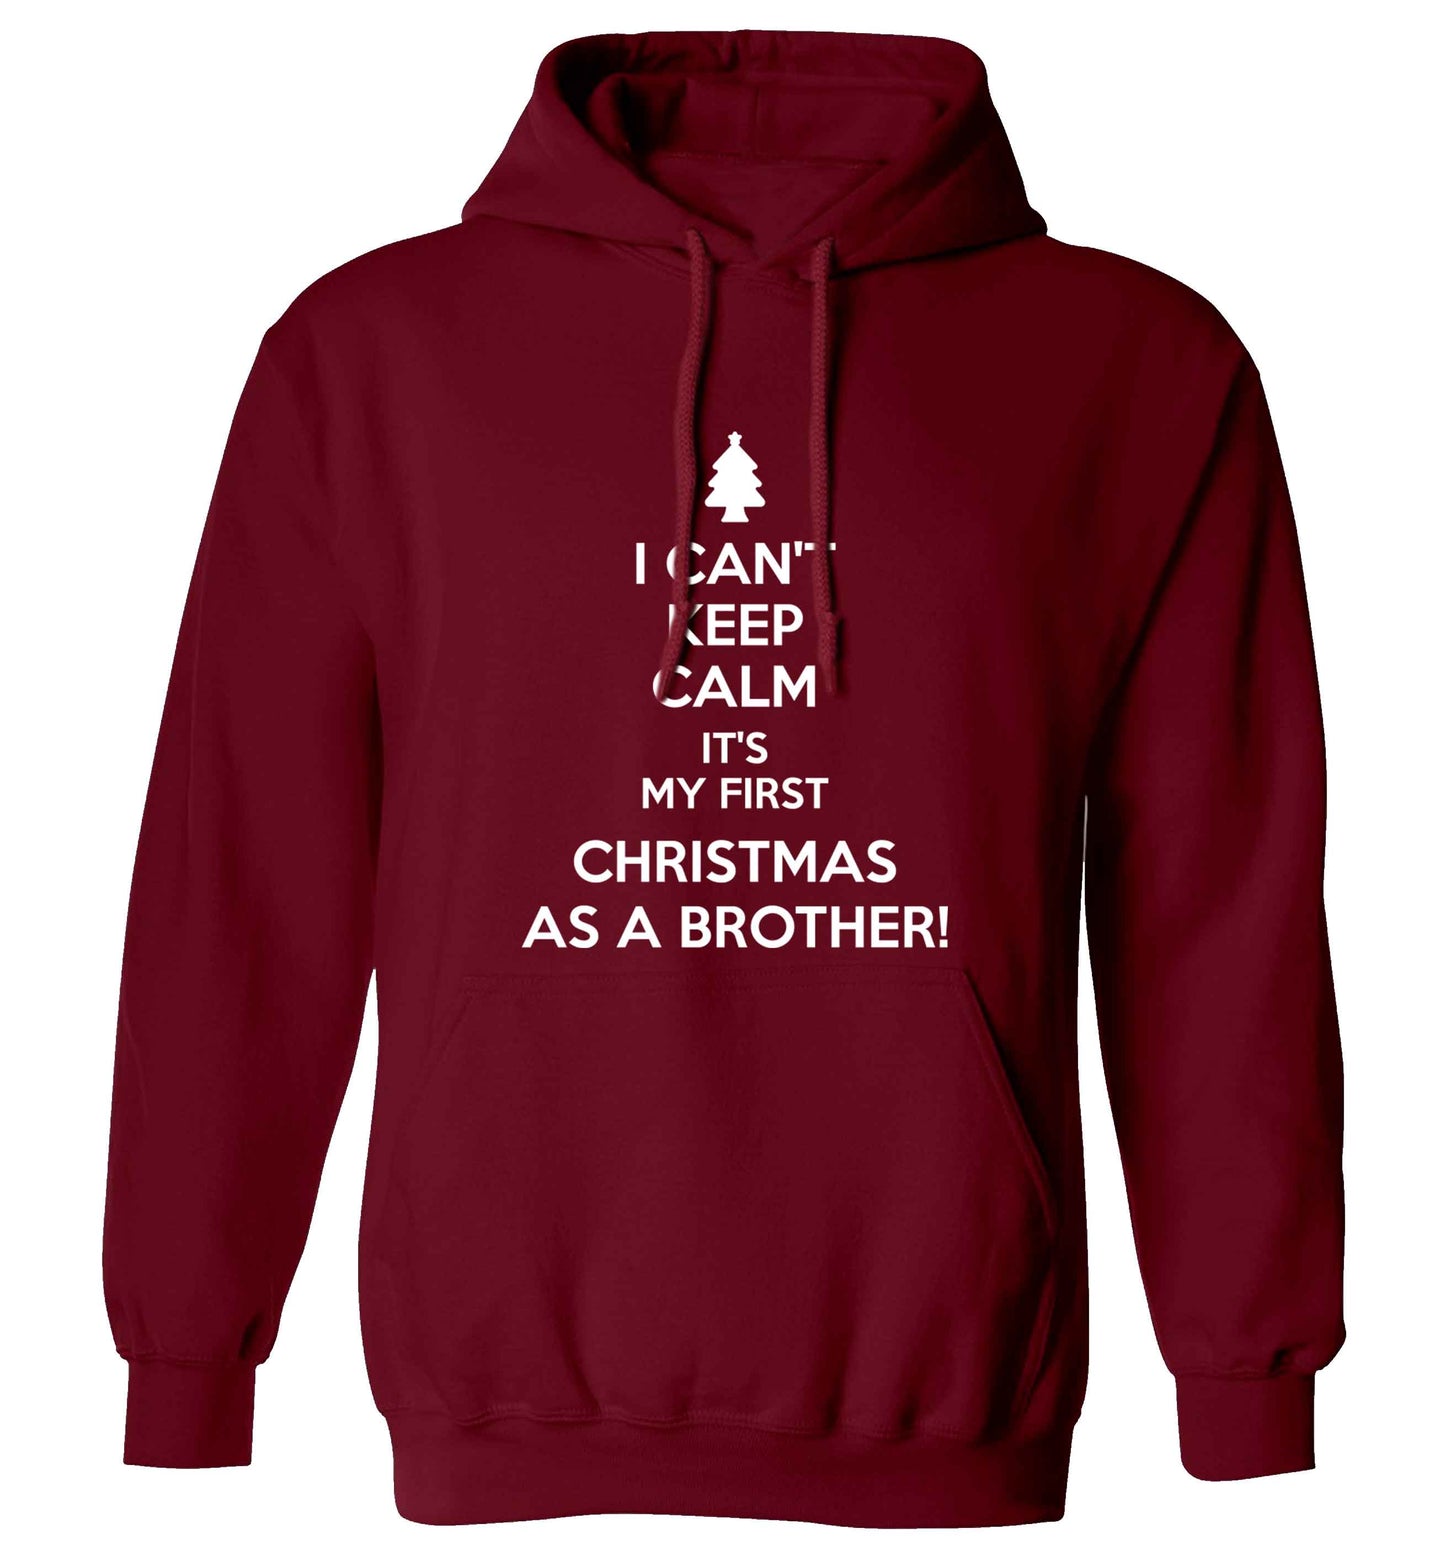 I can't keep calm it's my first Christmas as a brother! adults unisex maroon hoodie 2XL